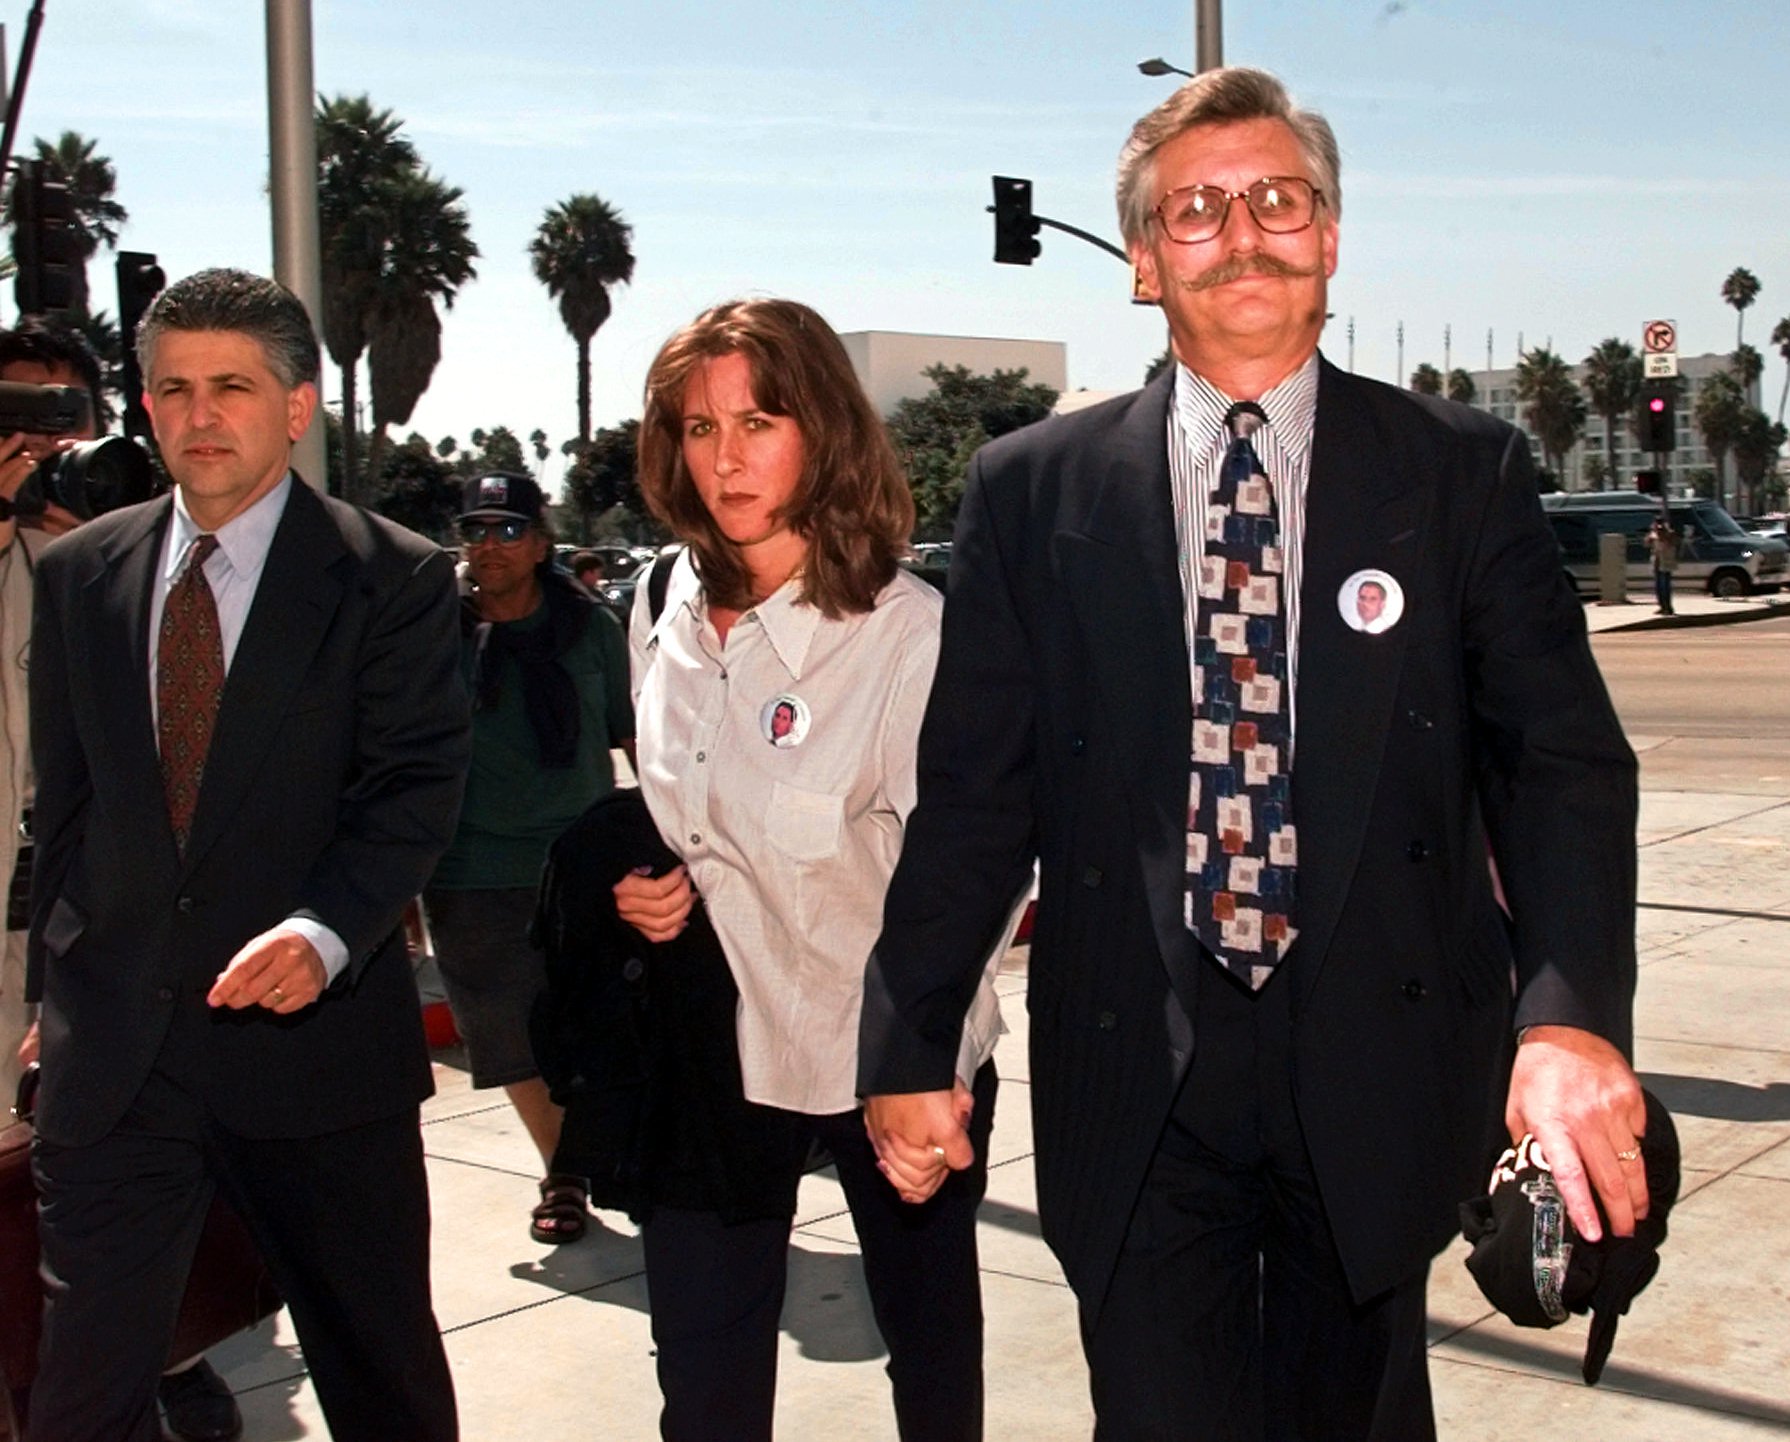 PHOTO: Fred Goldman, right, and his daughter Kim, leave Los Angeles County Superior Court along with their attorney Daniel Petrocelli following pre-trial hearings in the wrongful-death case against O.J. Simpson, Sept. 17, 1996, in Santa Monica, Calif. 